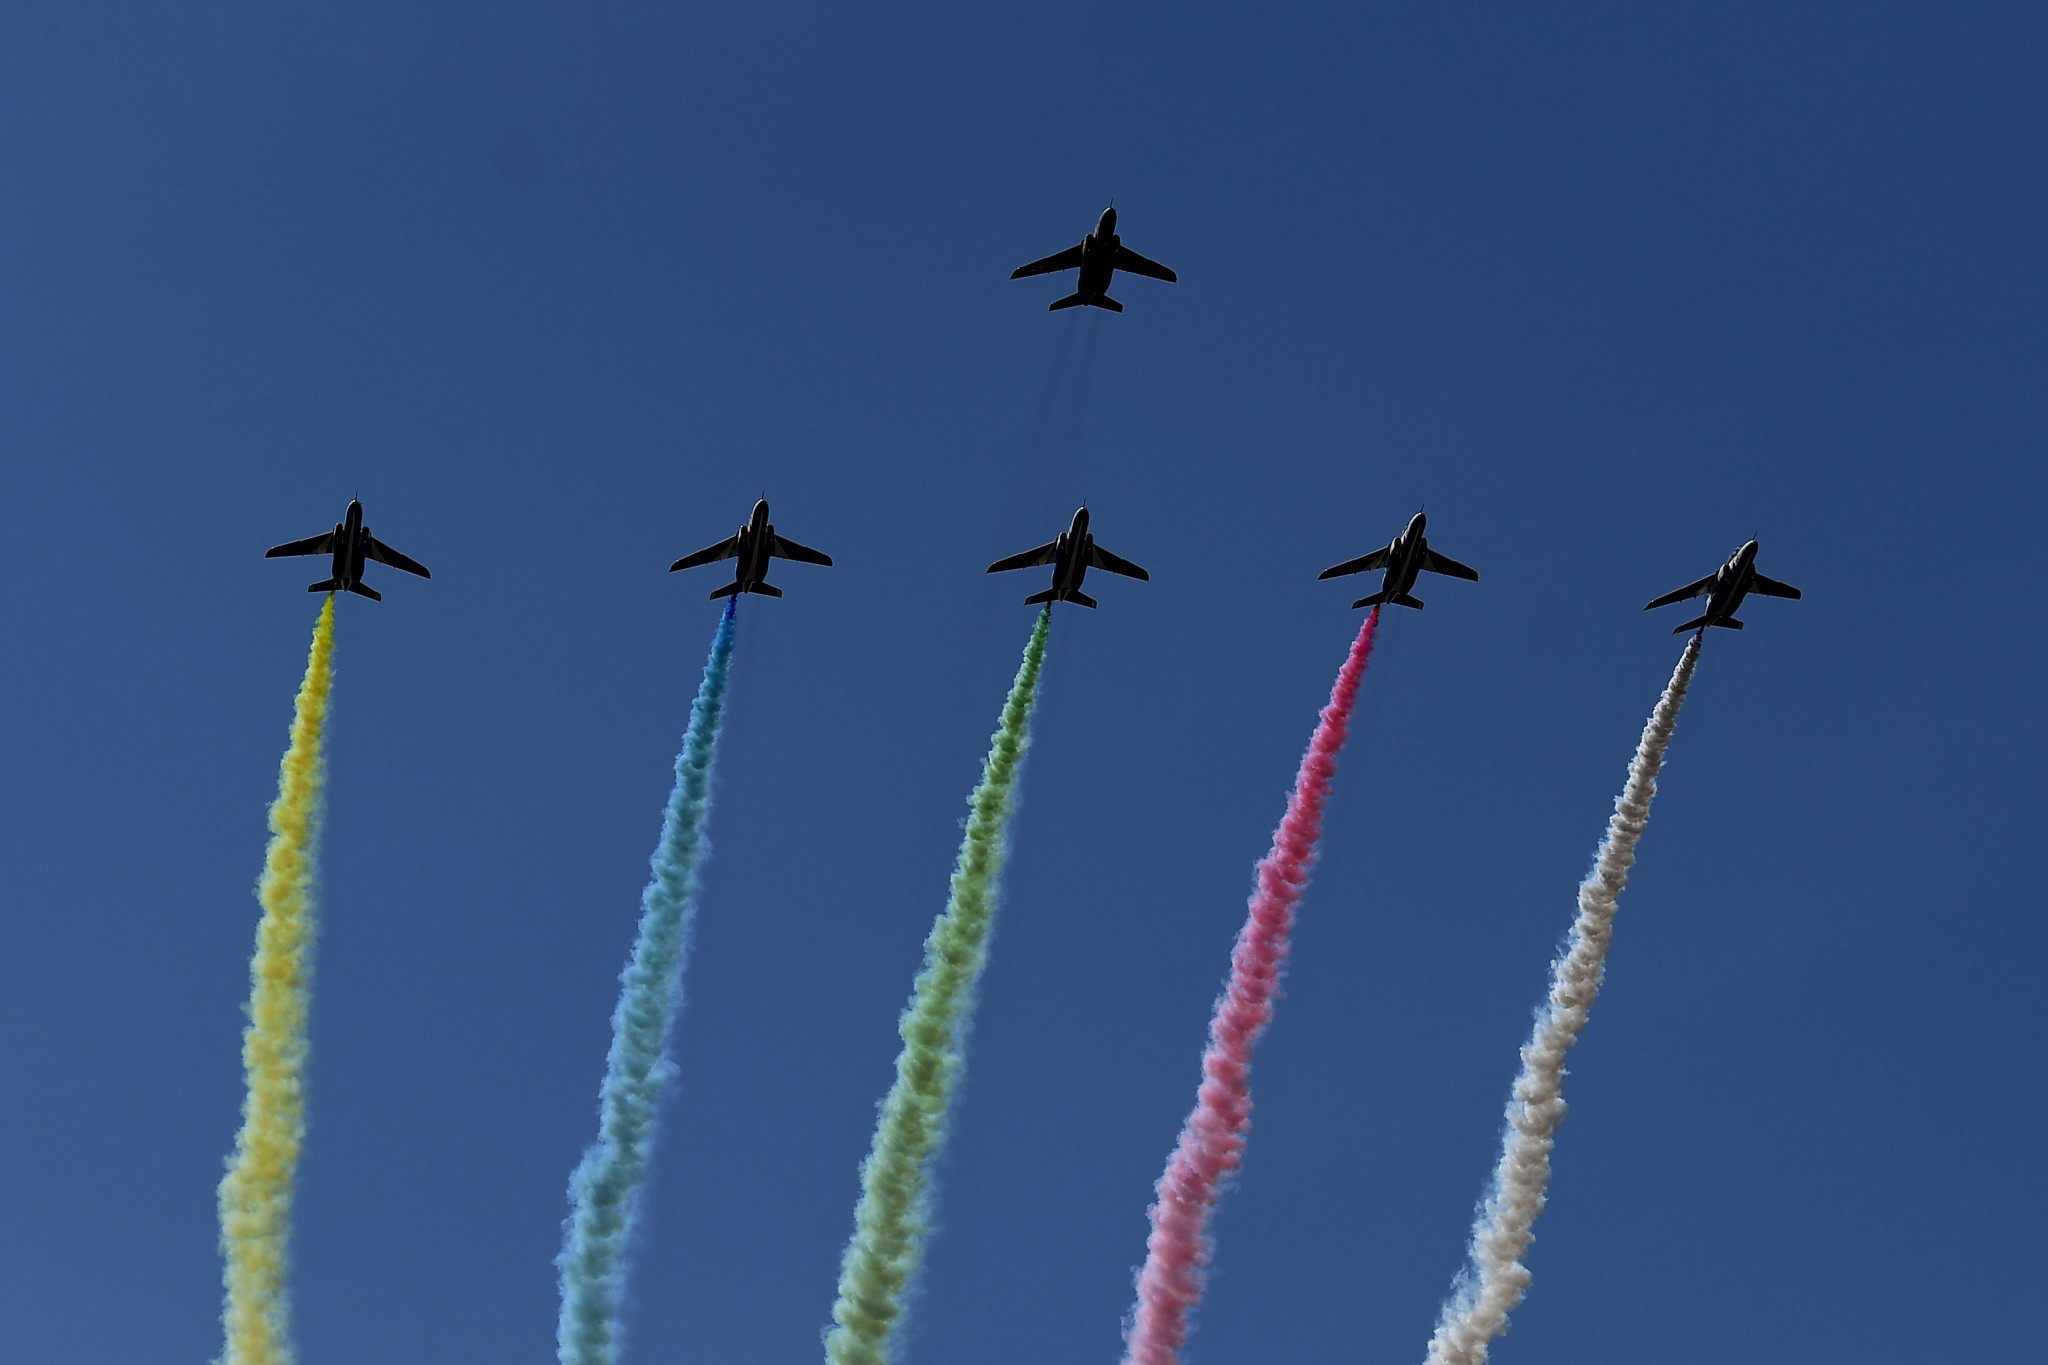 Japan's Blue Impulse team pays homage to the Olympic rings earlier this year - recreating the Opening Ceremony of the 1964 Olympic Games in Tokyo ©Getty Images